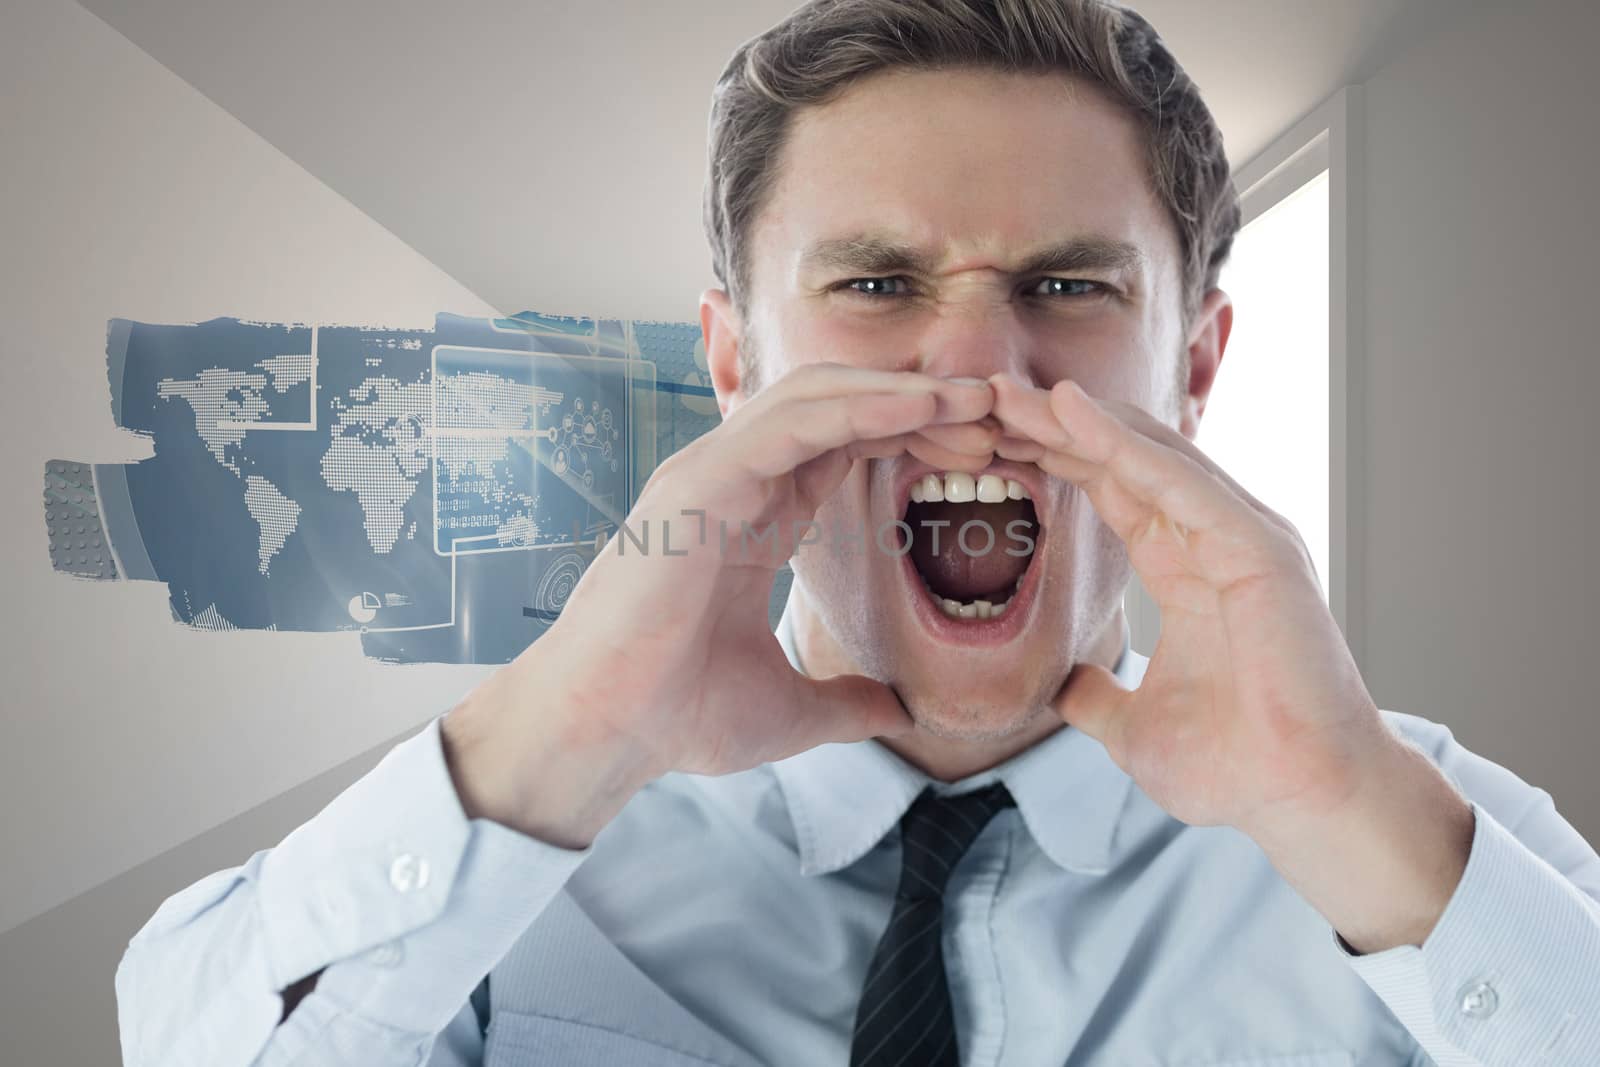 Angry businessman shouting against abstract screen in room showing technology interface